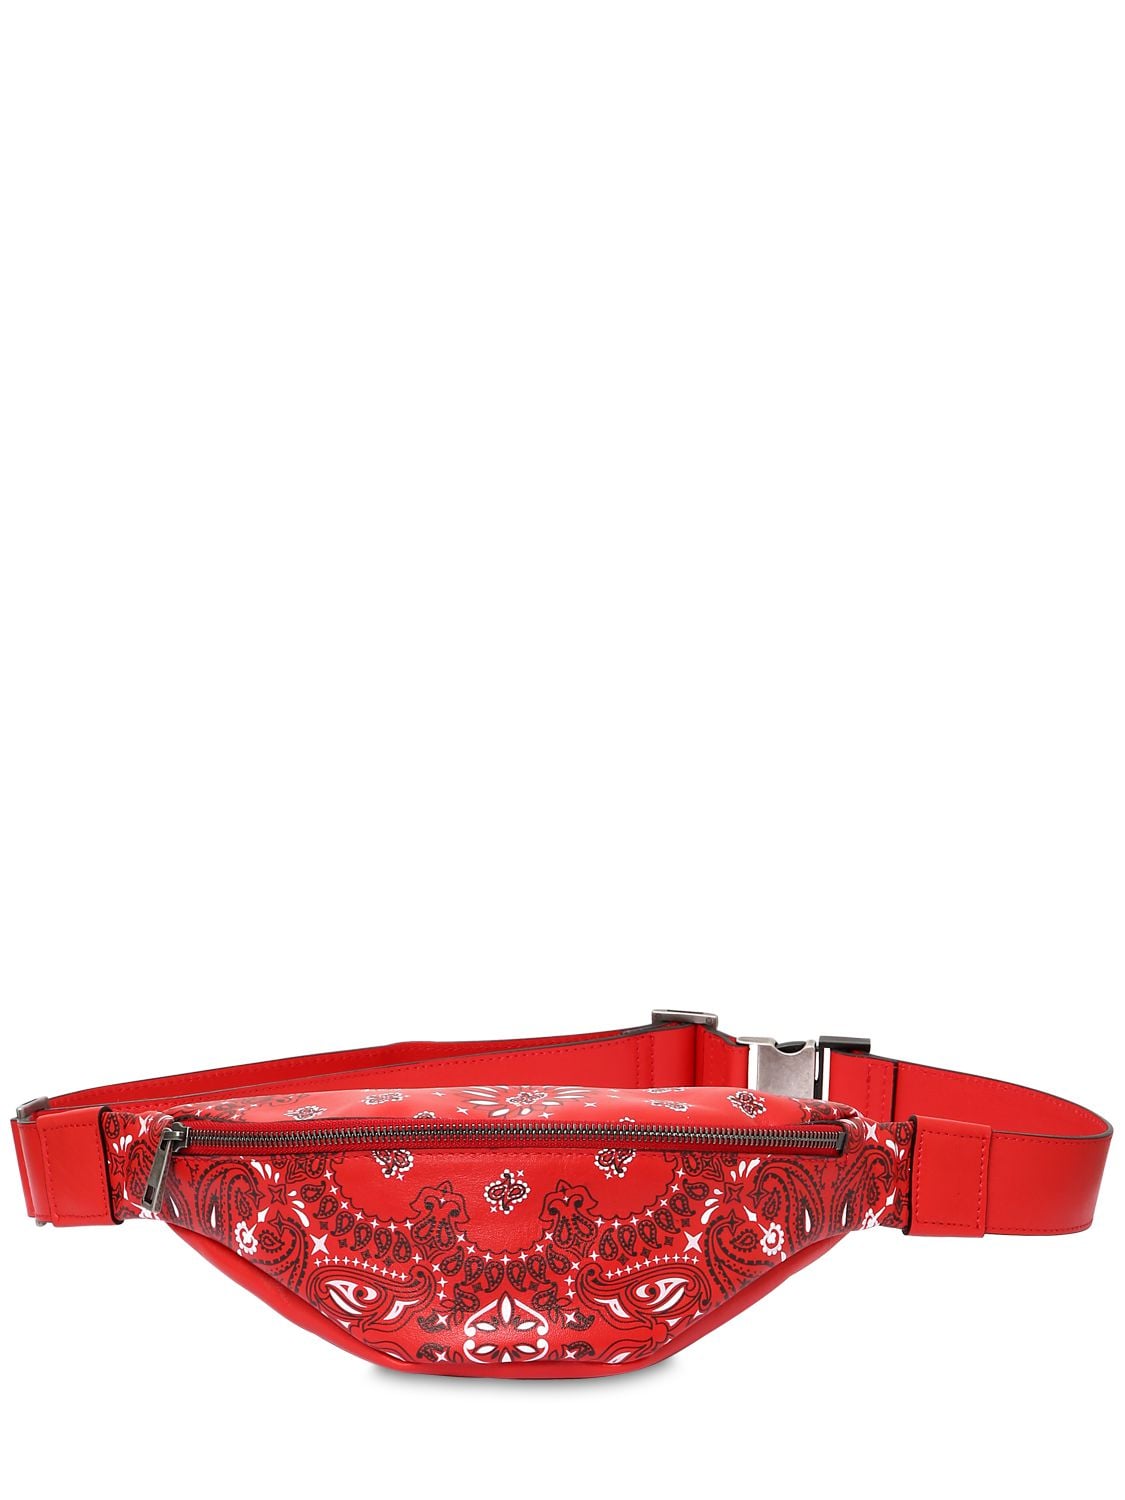 Htc Los Angeles Bandana Print Leather Belt Bag In Red